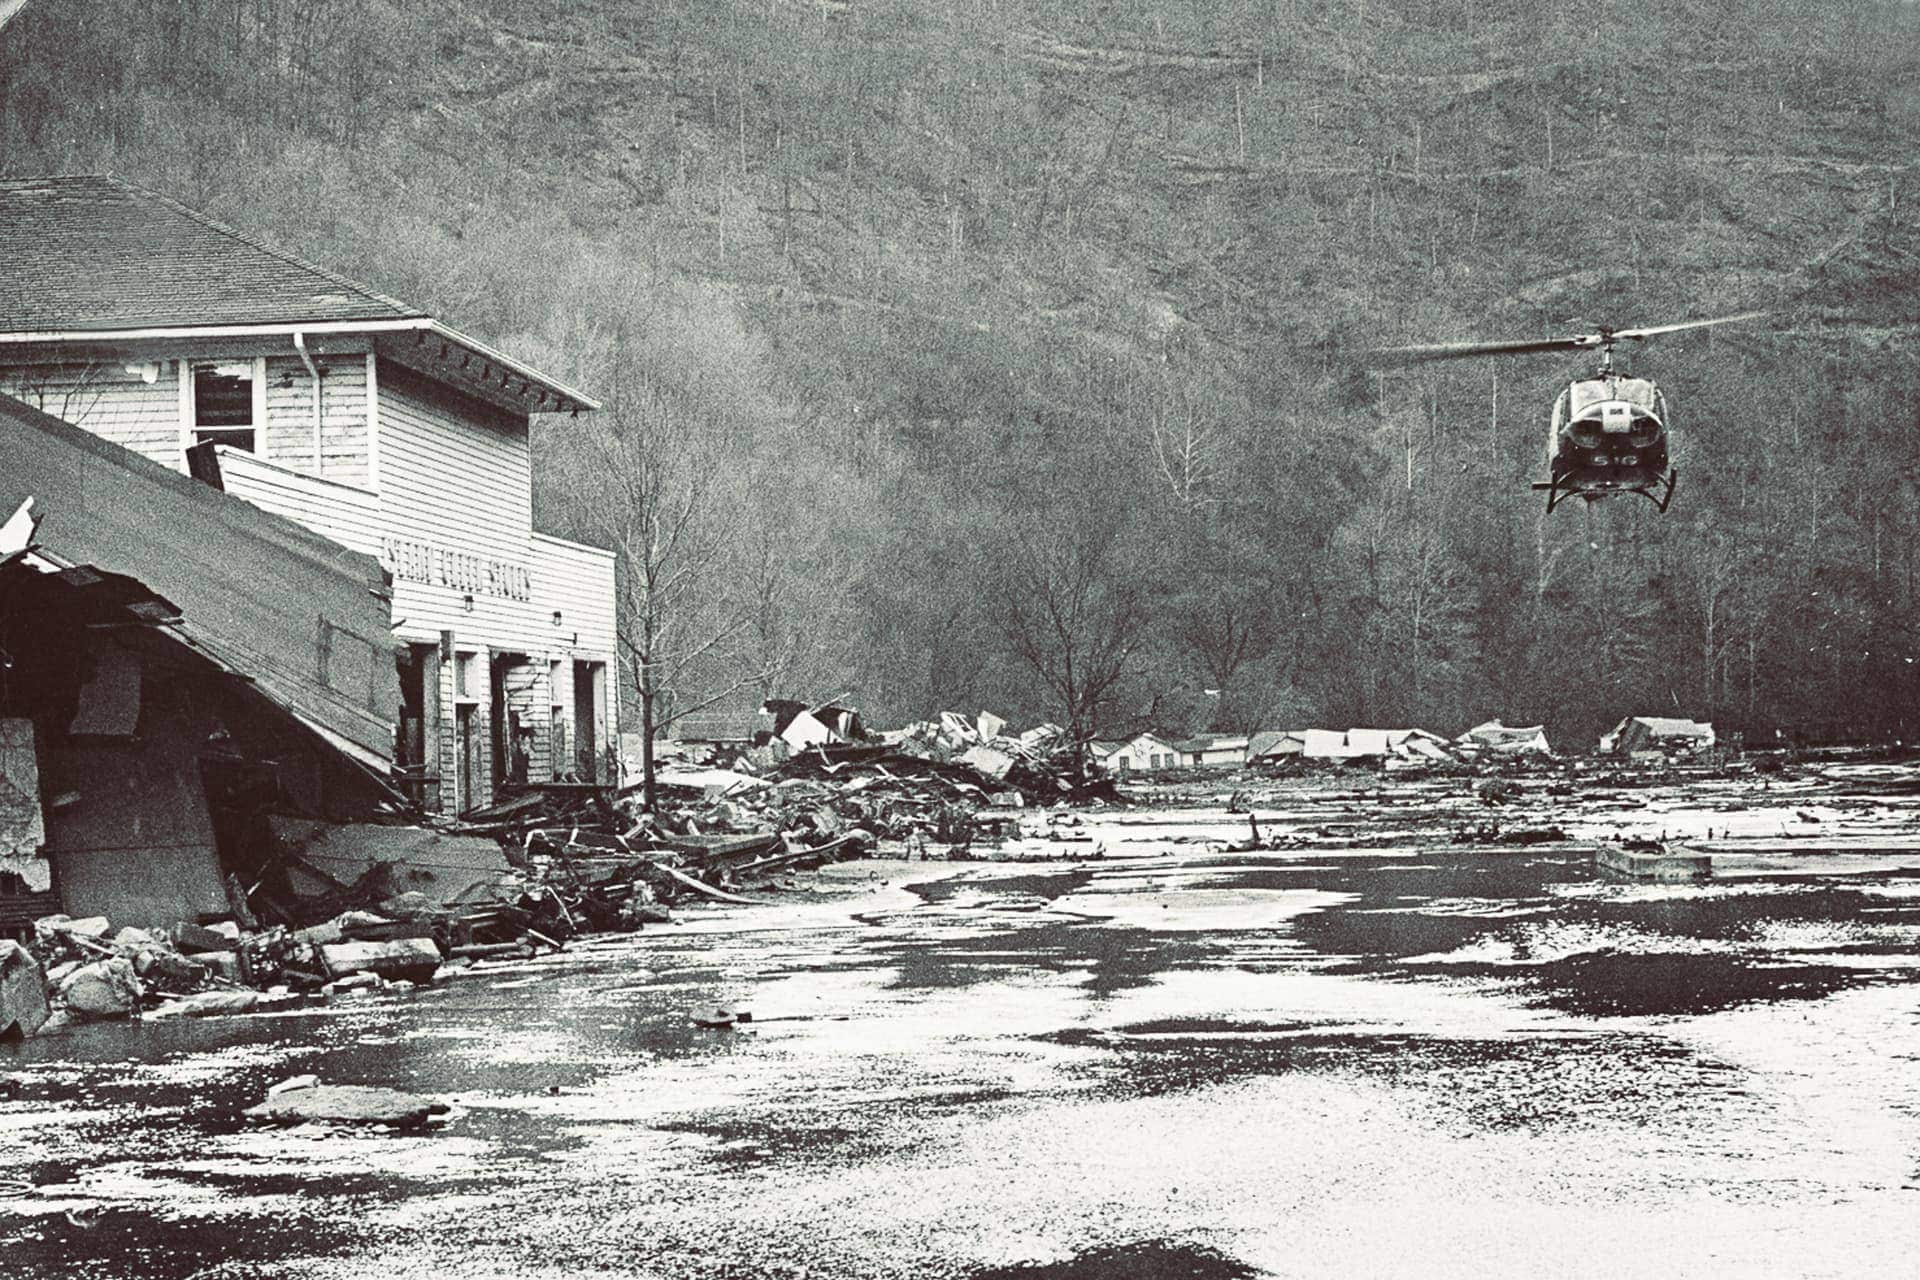 Helicopter above the devastation on Buffalo Creek.